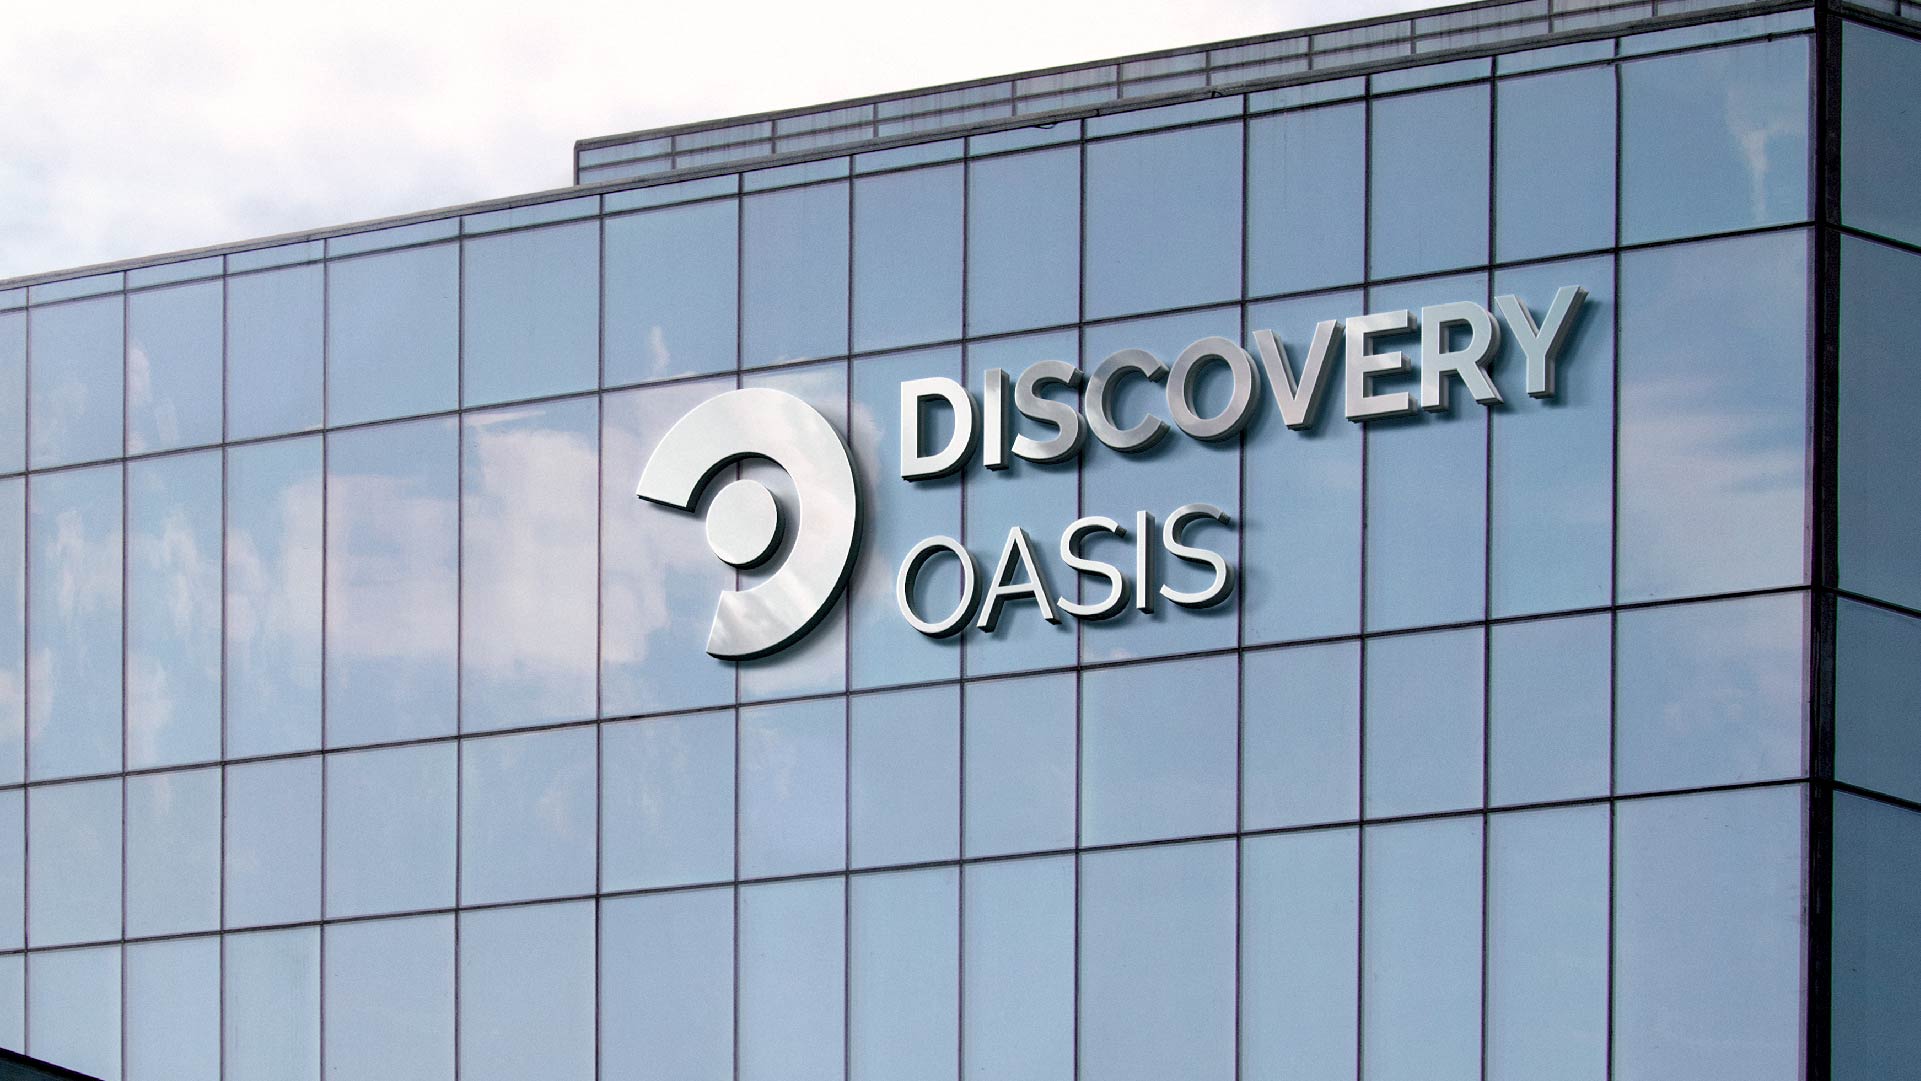 Discovery Oasis